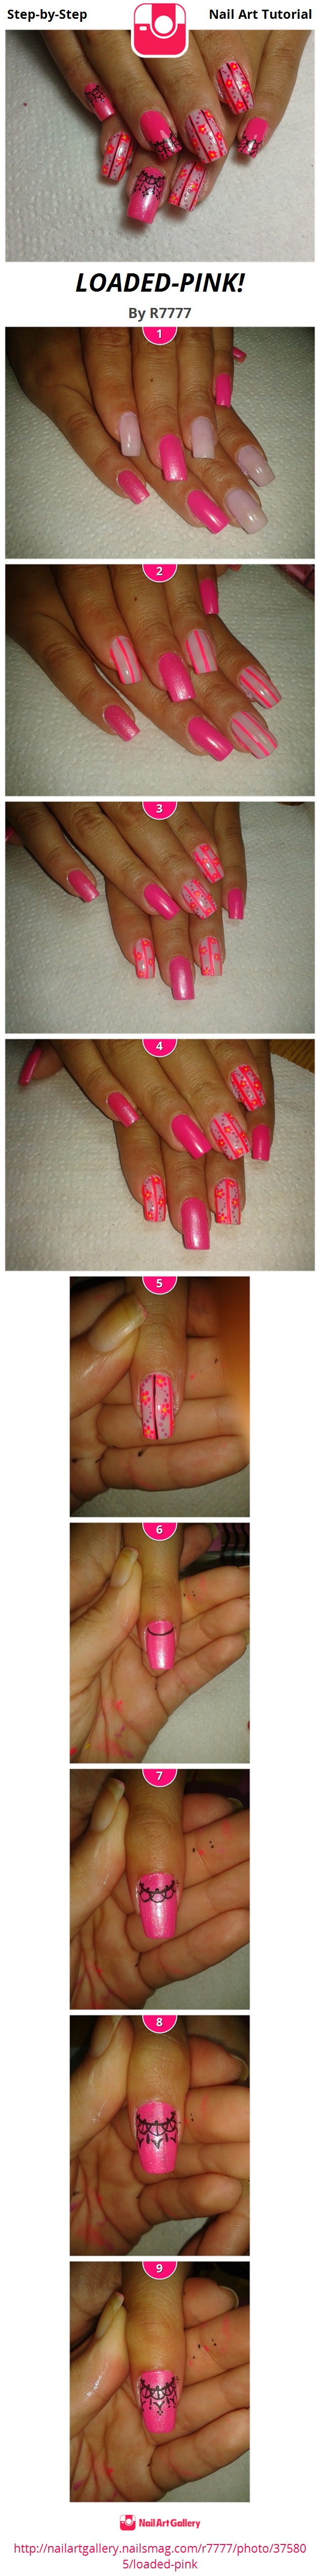 LOADED-PINK! - Nail Art Gallery